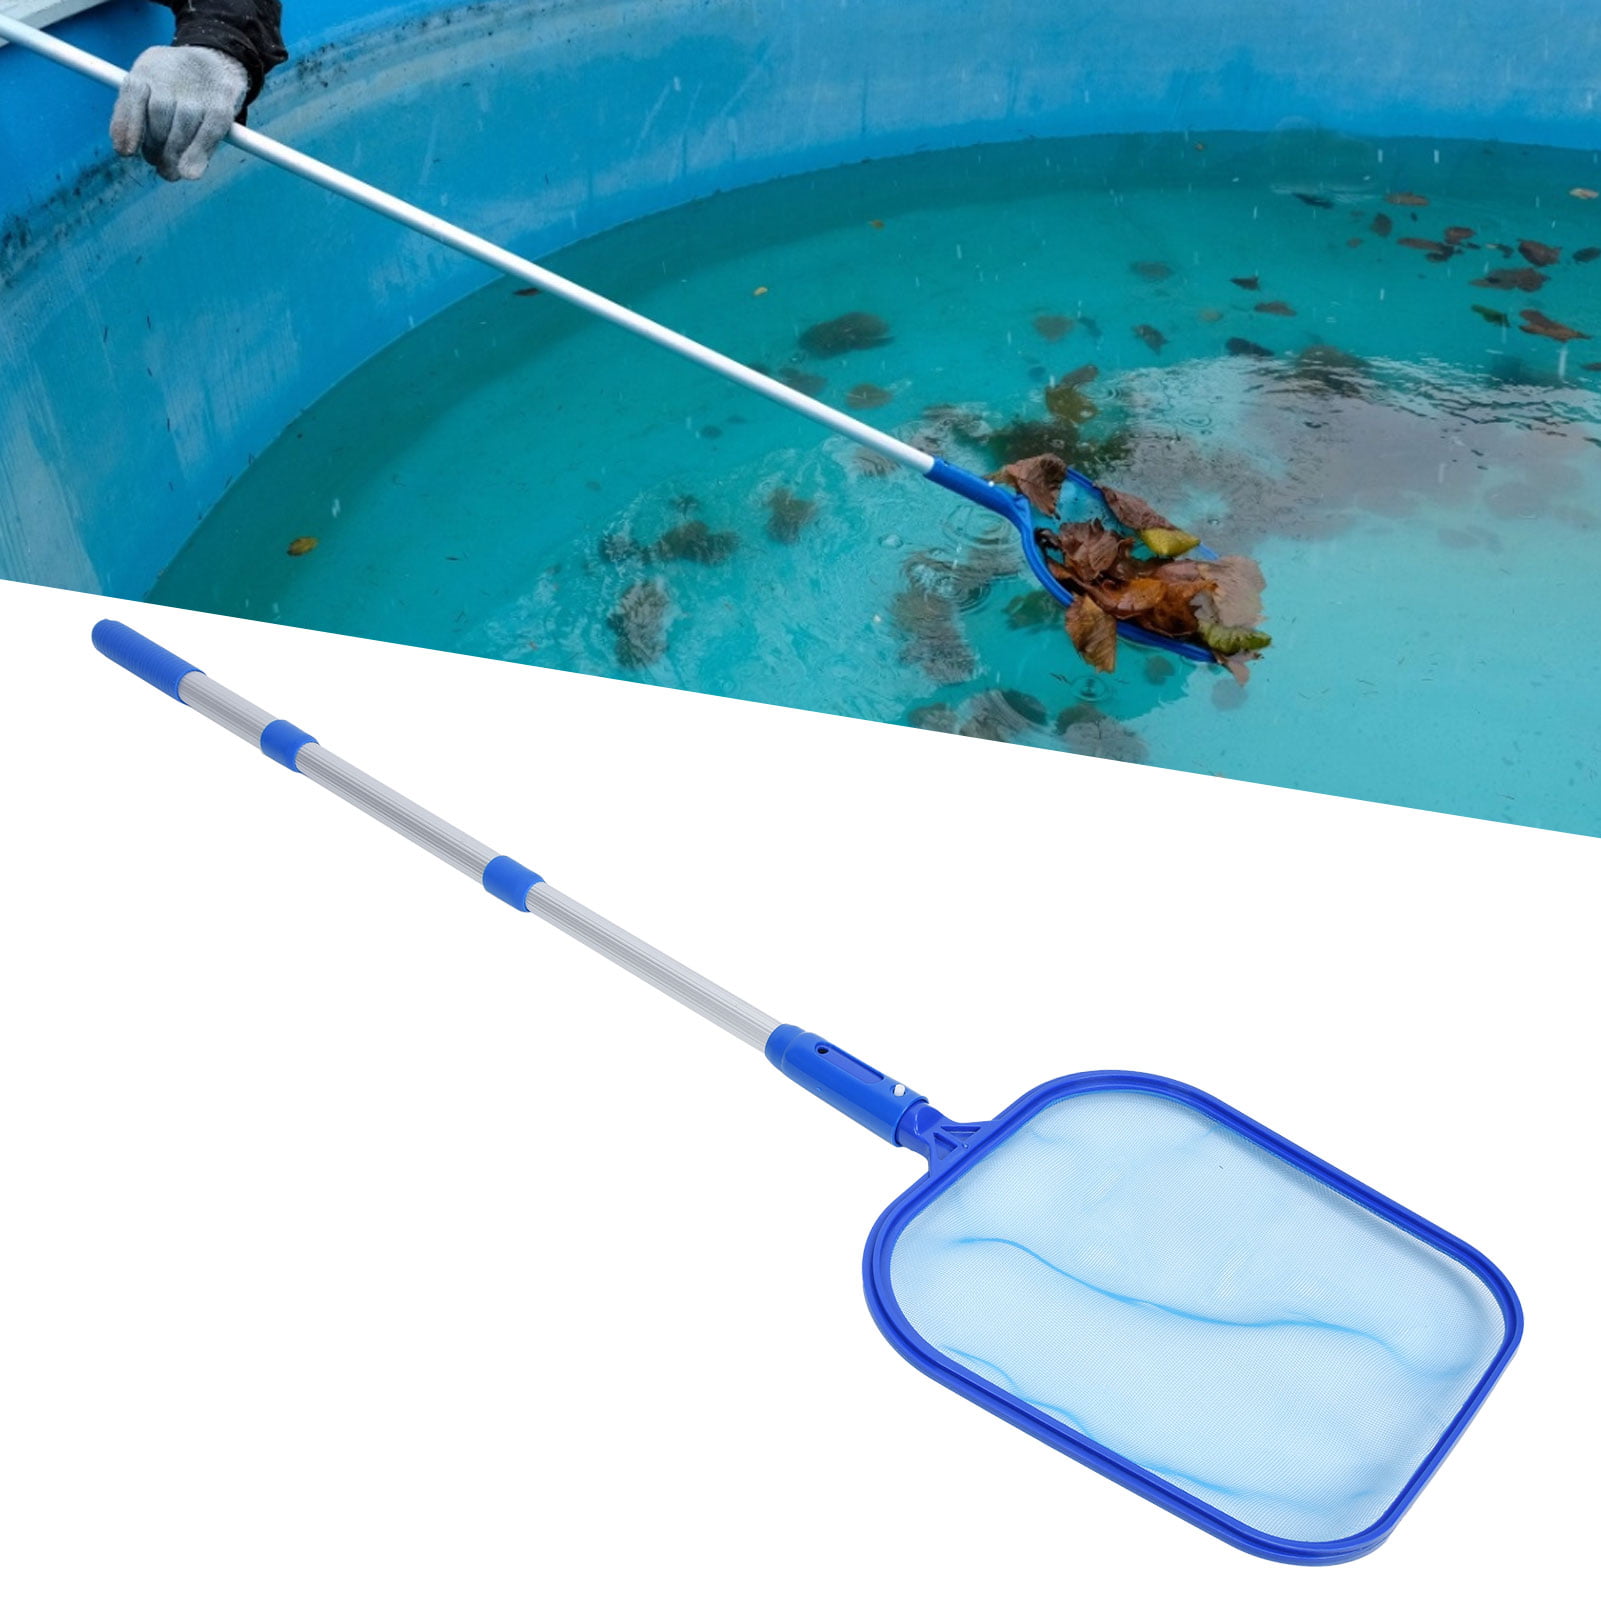 Leaf Skimmer Net Swimming Pool Spa Hot Tub Pond Fountain Cleaning Tool US LP1 00 